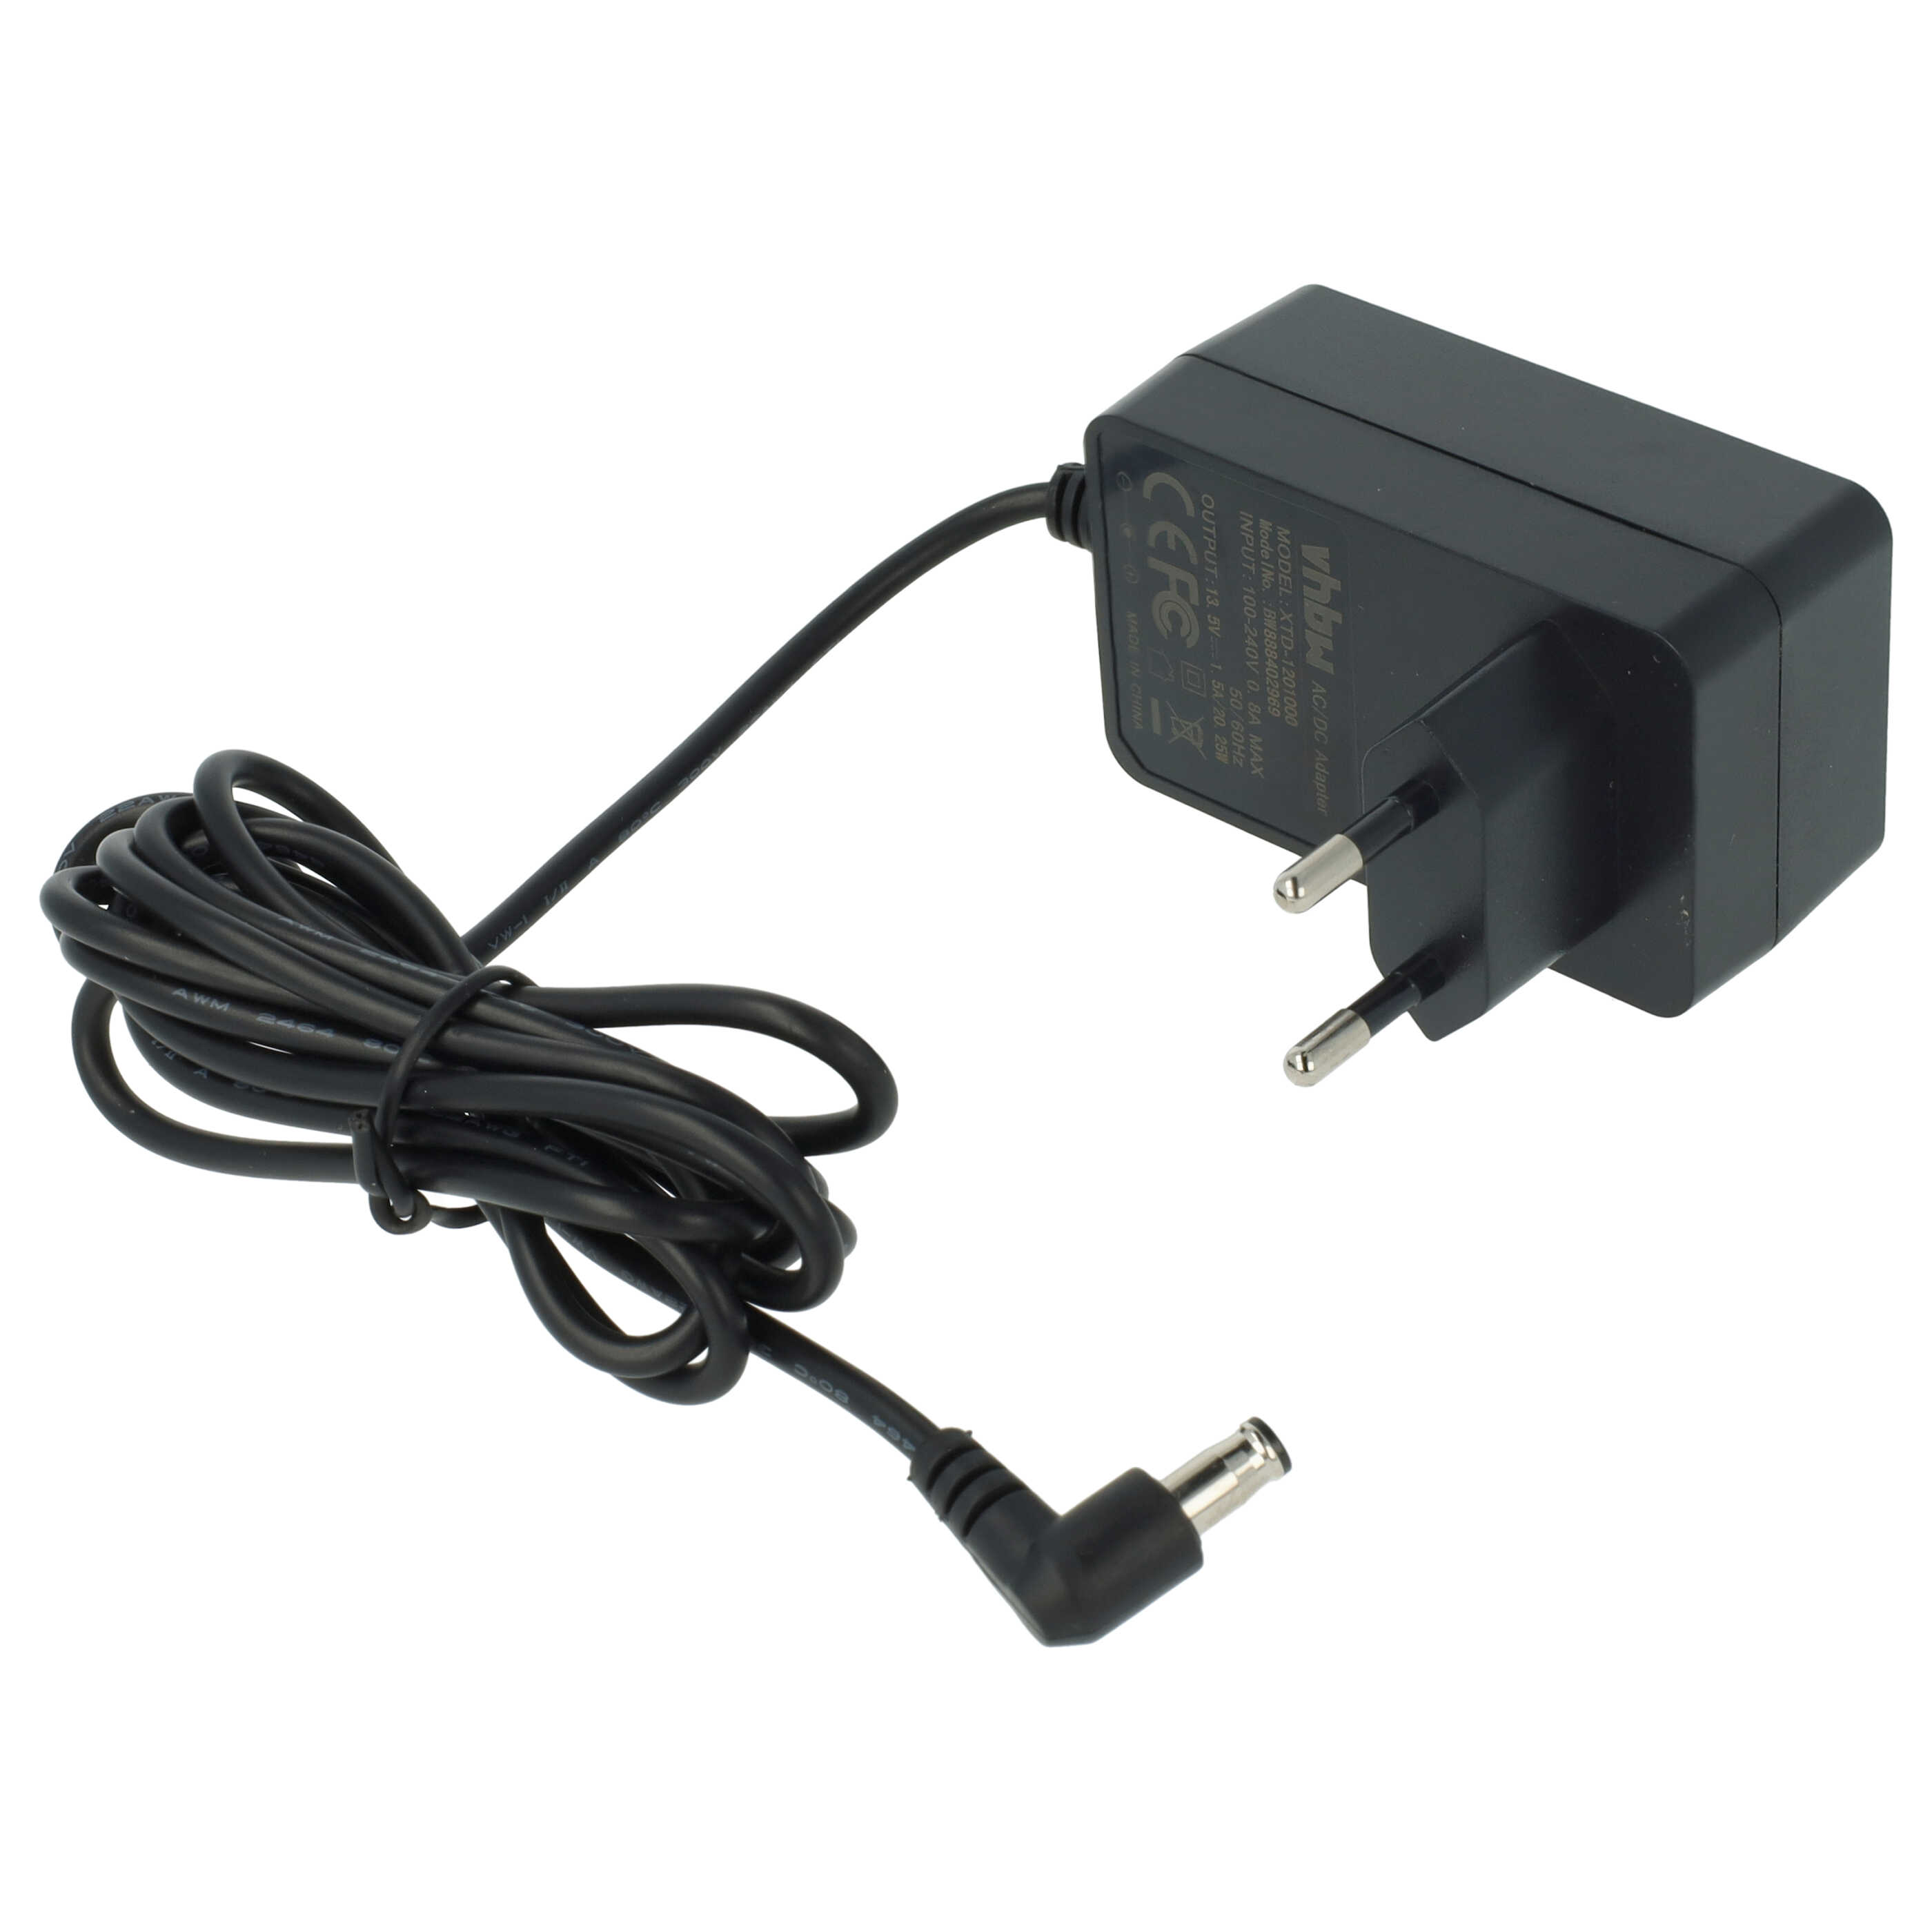 Mains Power Adapter replaces Epson A391AR, A391AS, 2116217–00, A391BS, A391GB for Epson Scanner - 170 cm